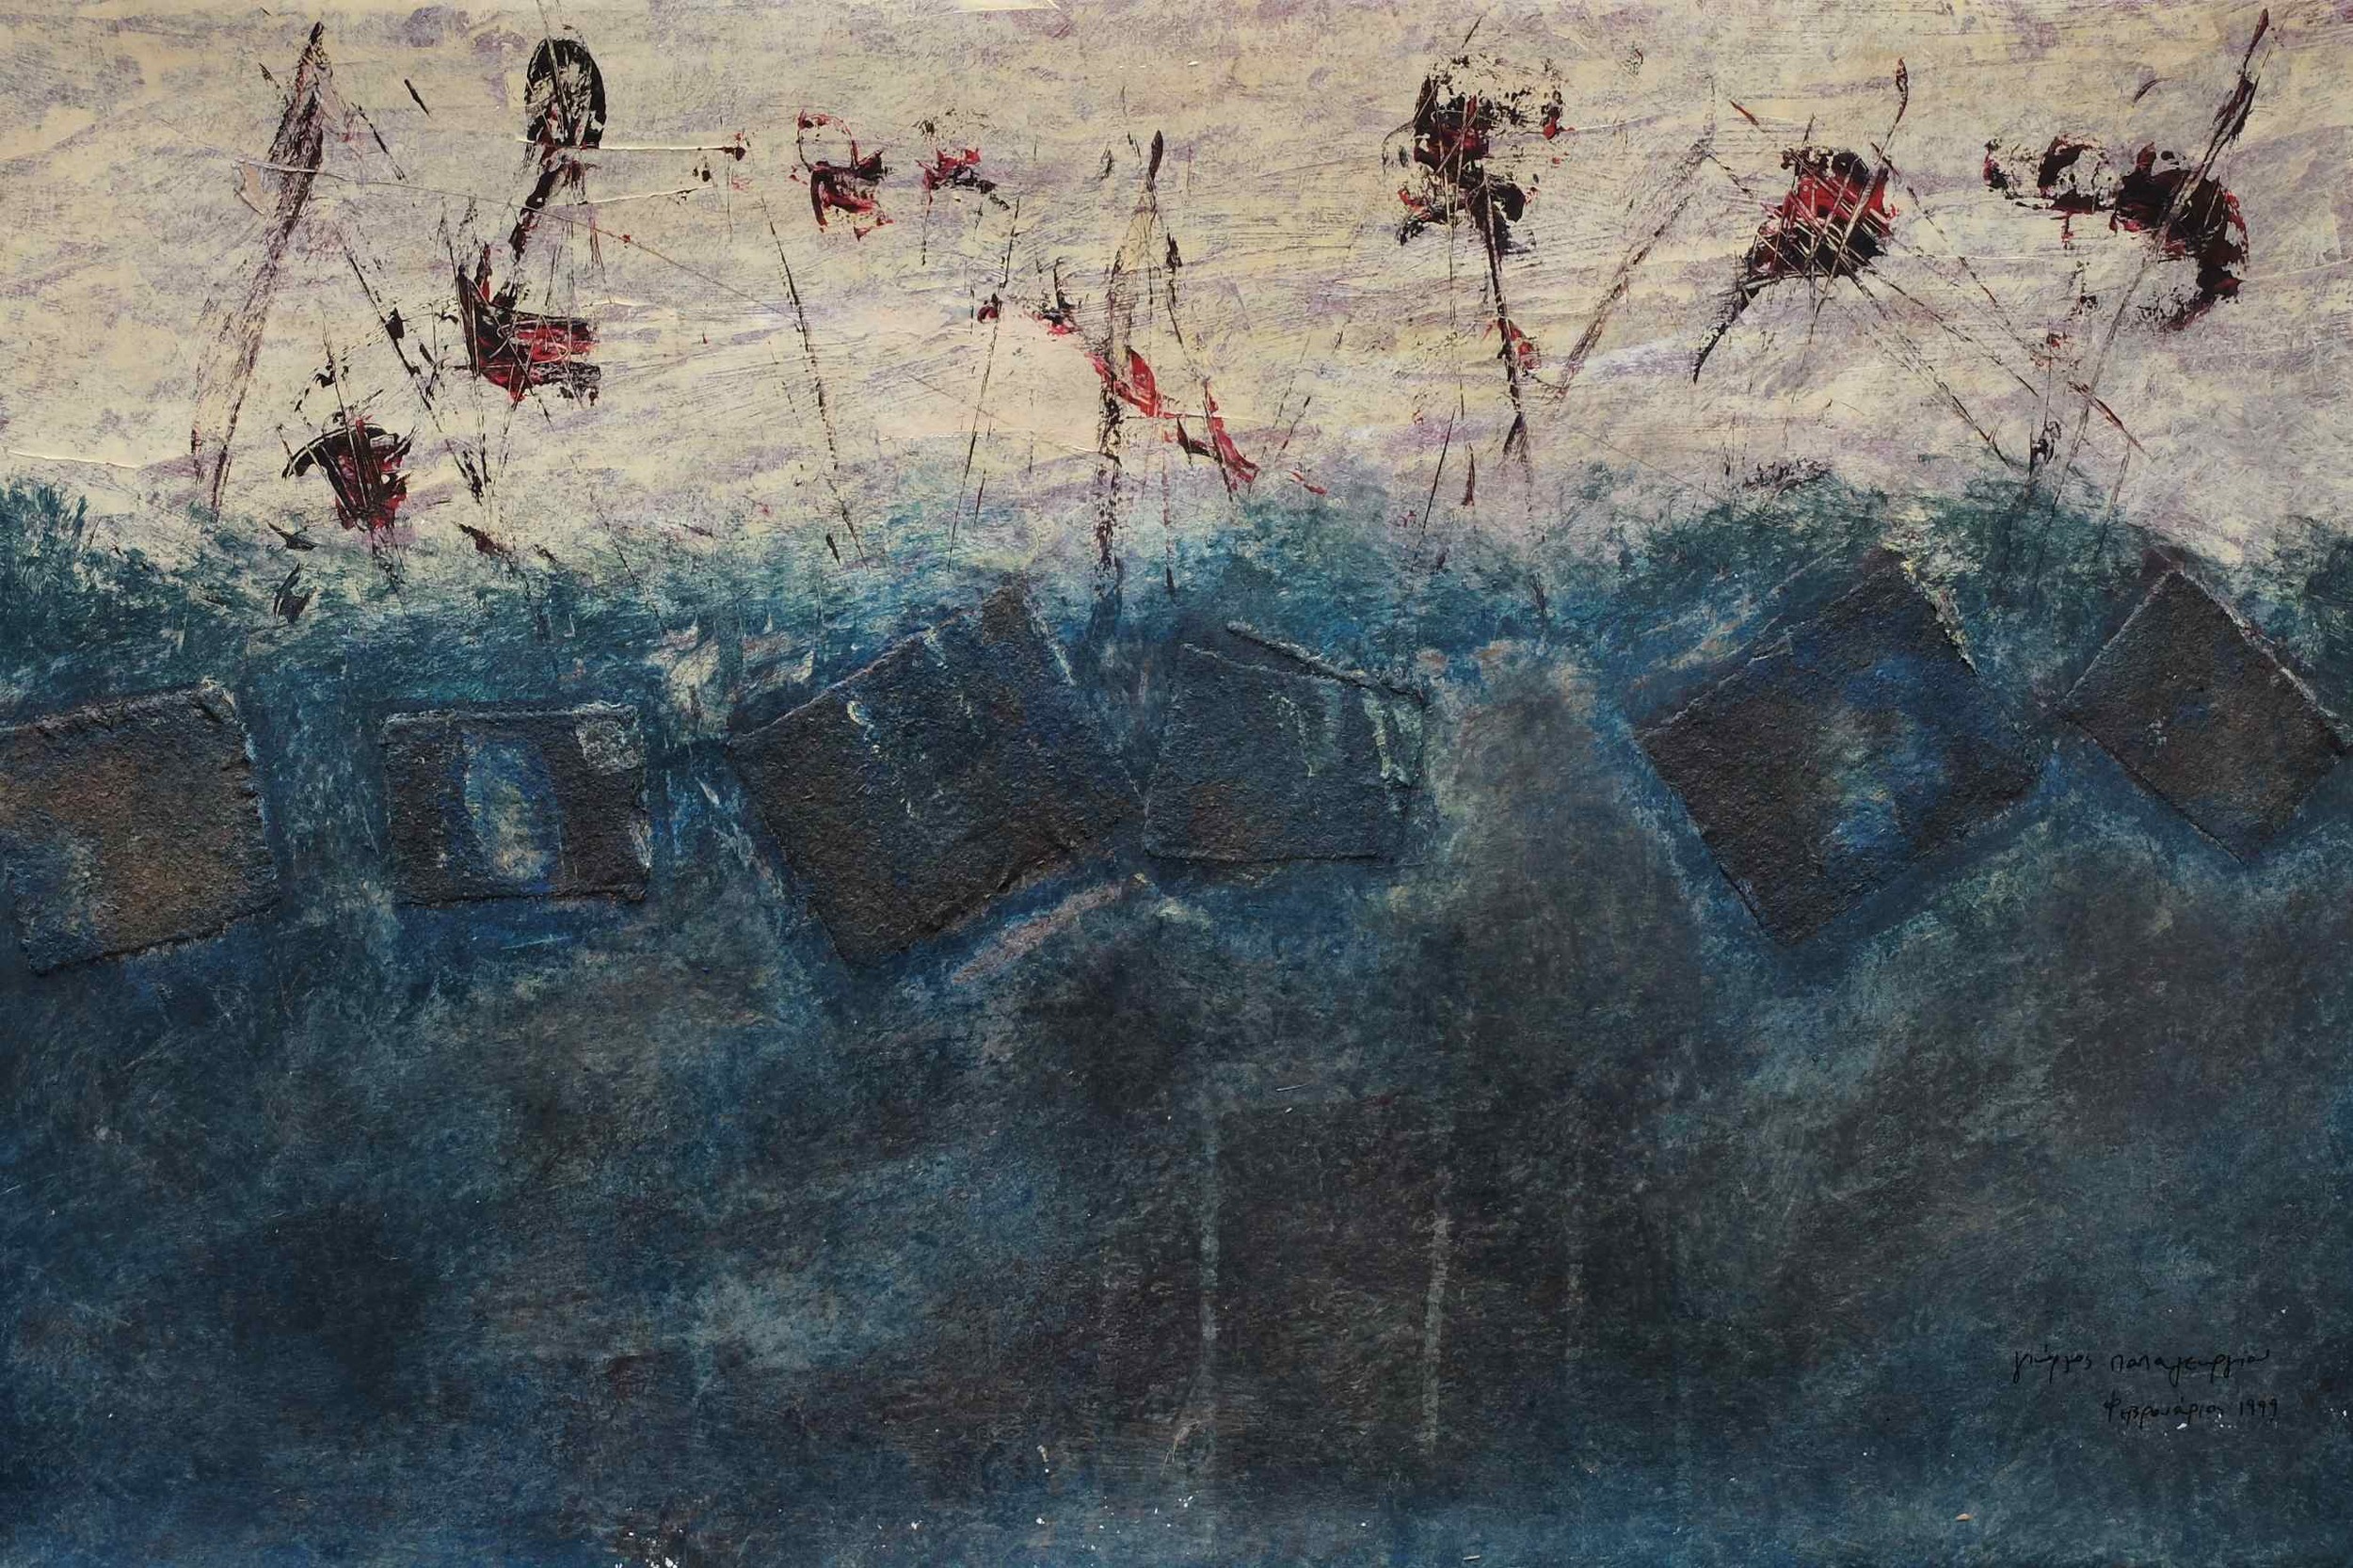  untitled; mixed media on paper; 41x62; 1999 